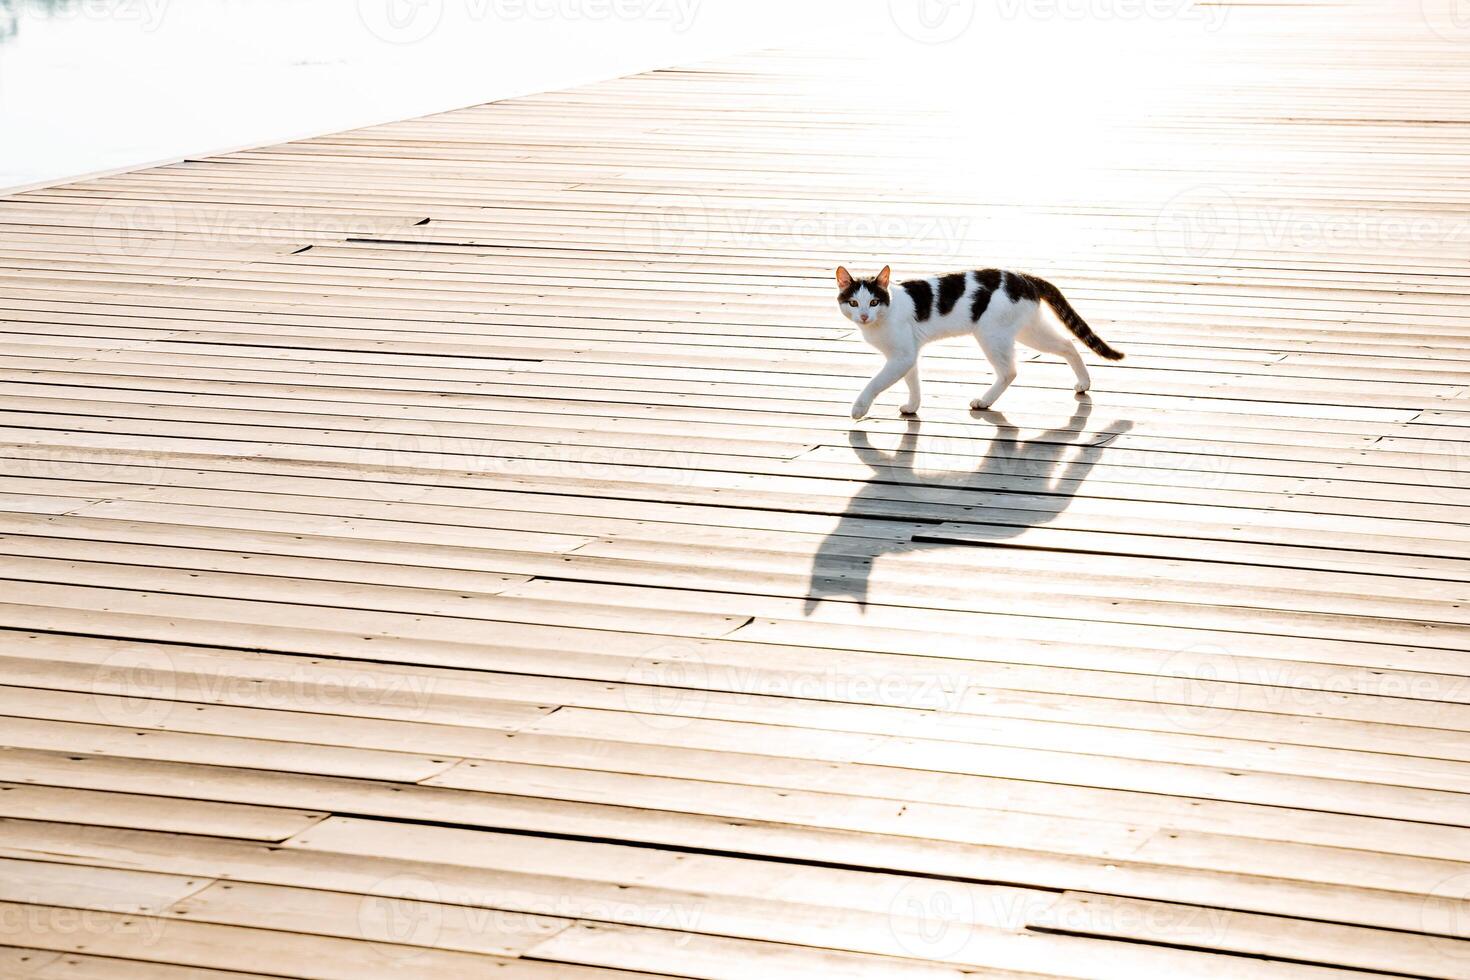 A Russian cat walks on a pier along the embankment, a wooden platform of boards, a domestic cat, a stray cat, a shadow on the road. photo